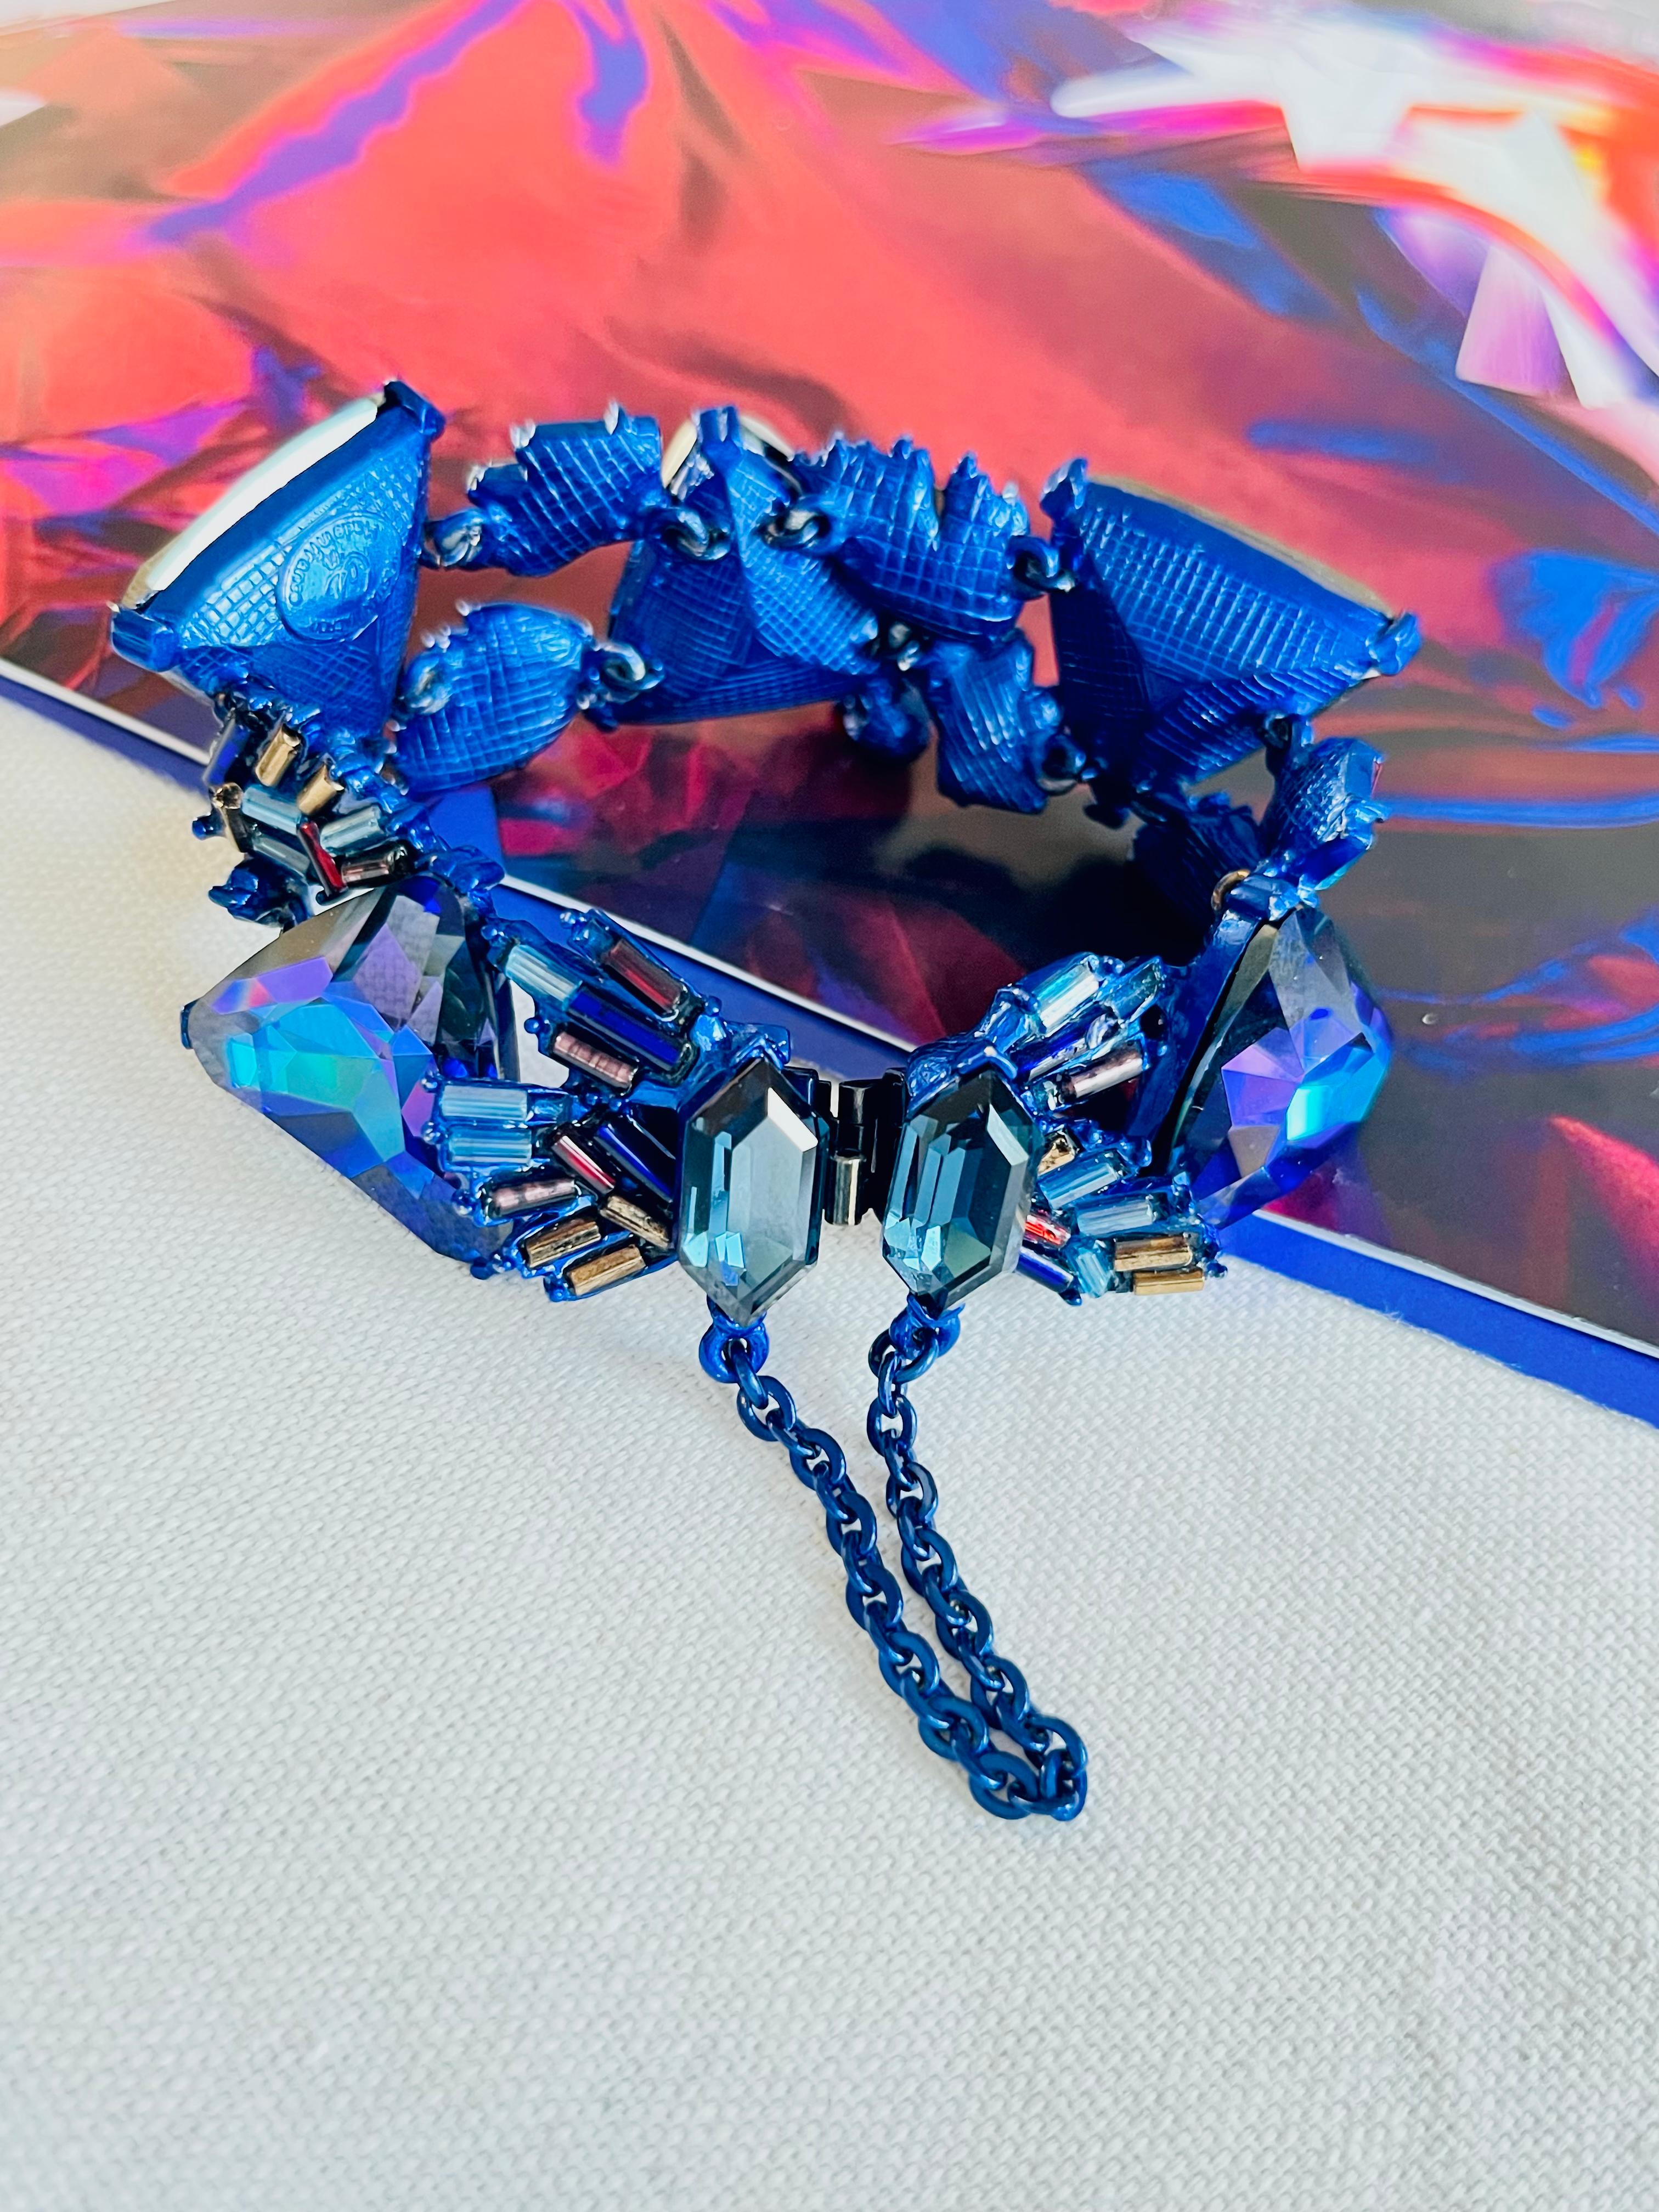 Very excellent condition. 100% Genuine. 

CHRISTIAN LACROIX vintage bracelet featuring massive purple crystals with iridescent rocaille beads.

Size: Approx. 18.0*3.0 cm.

Weight: 106 g.

_ _ _

Great for everyday wear. Come with velvet pouch and